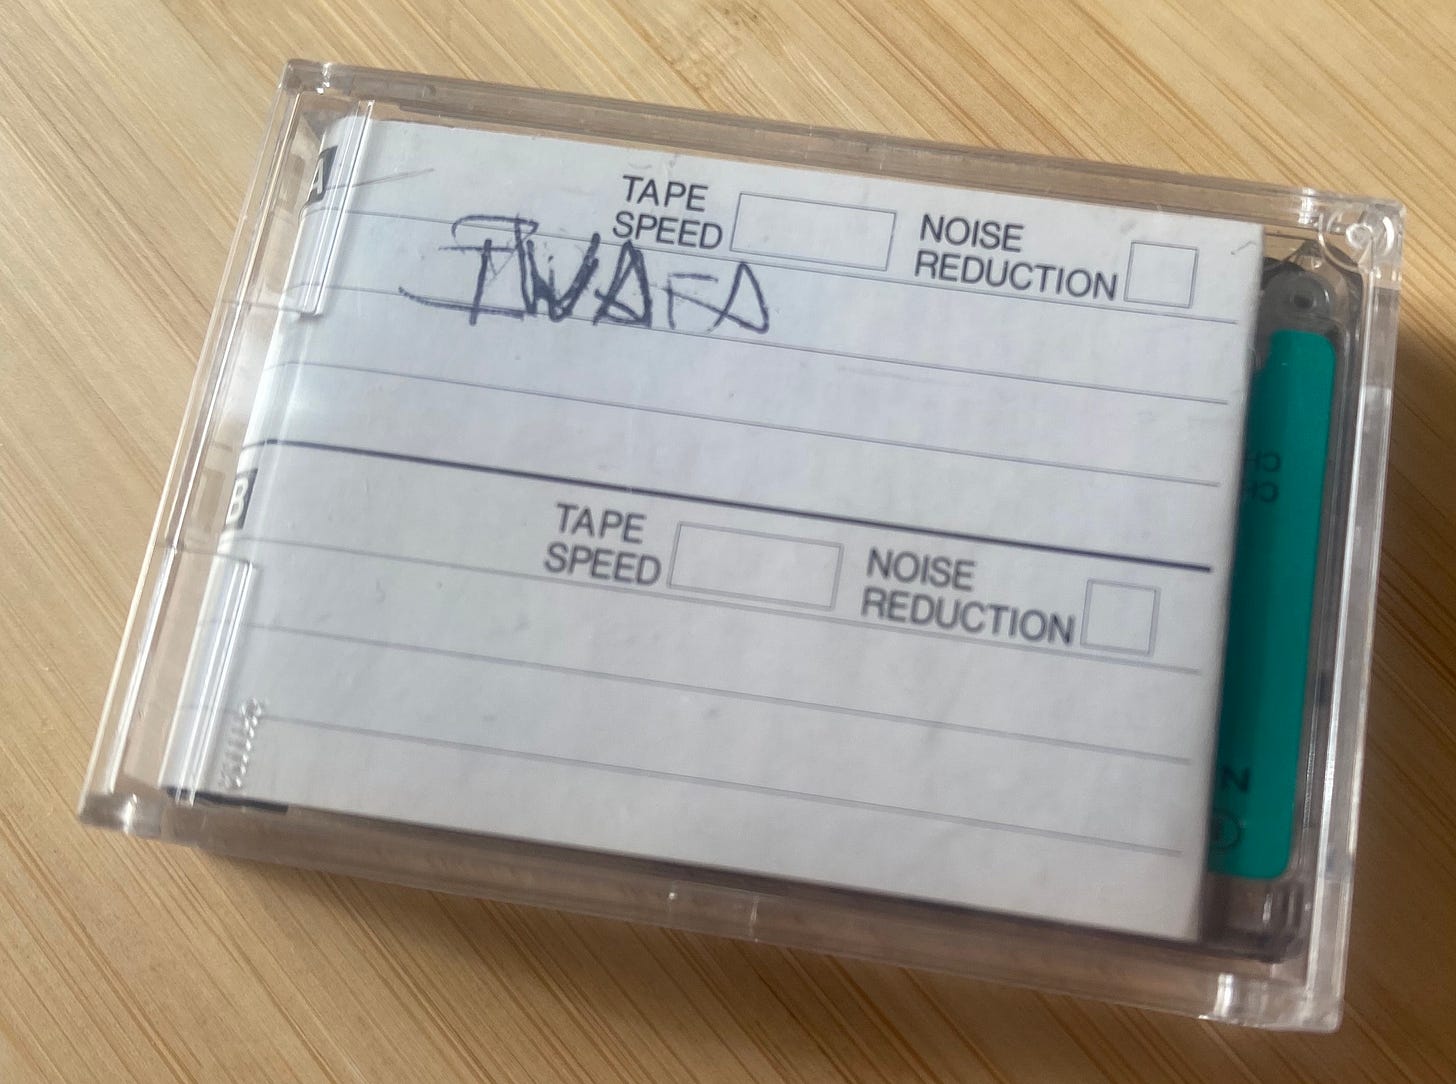 Photo of a small cassette case labeled "Iwata"